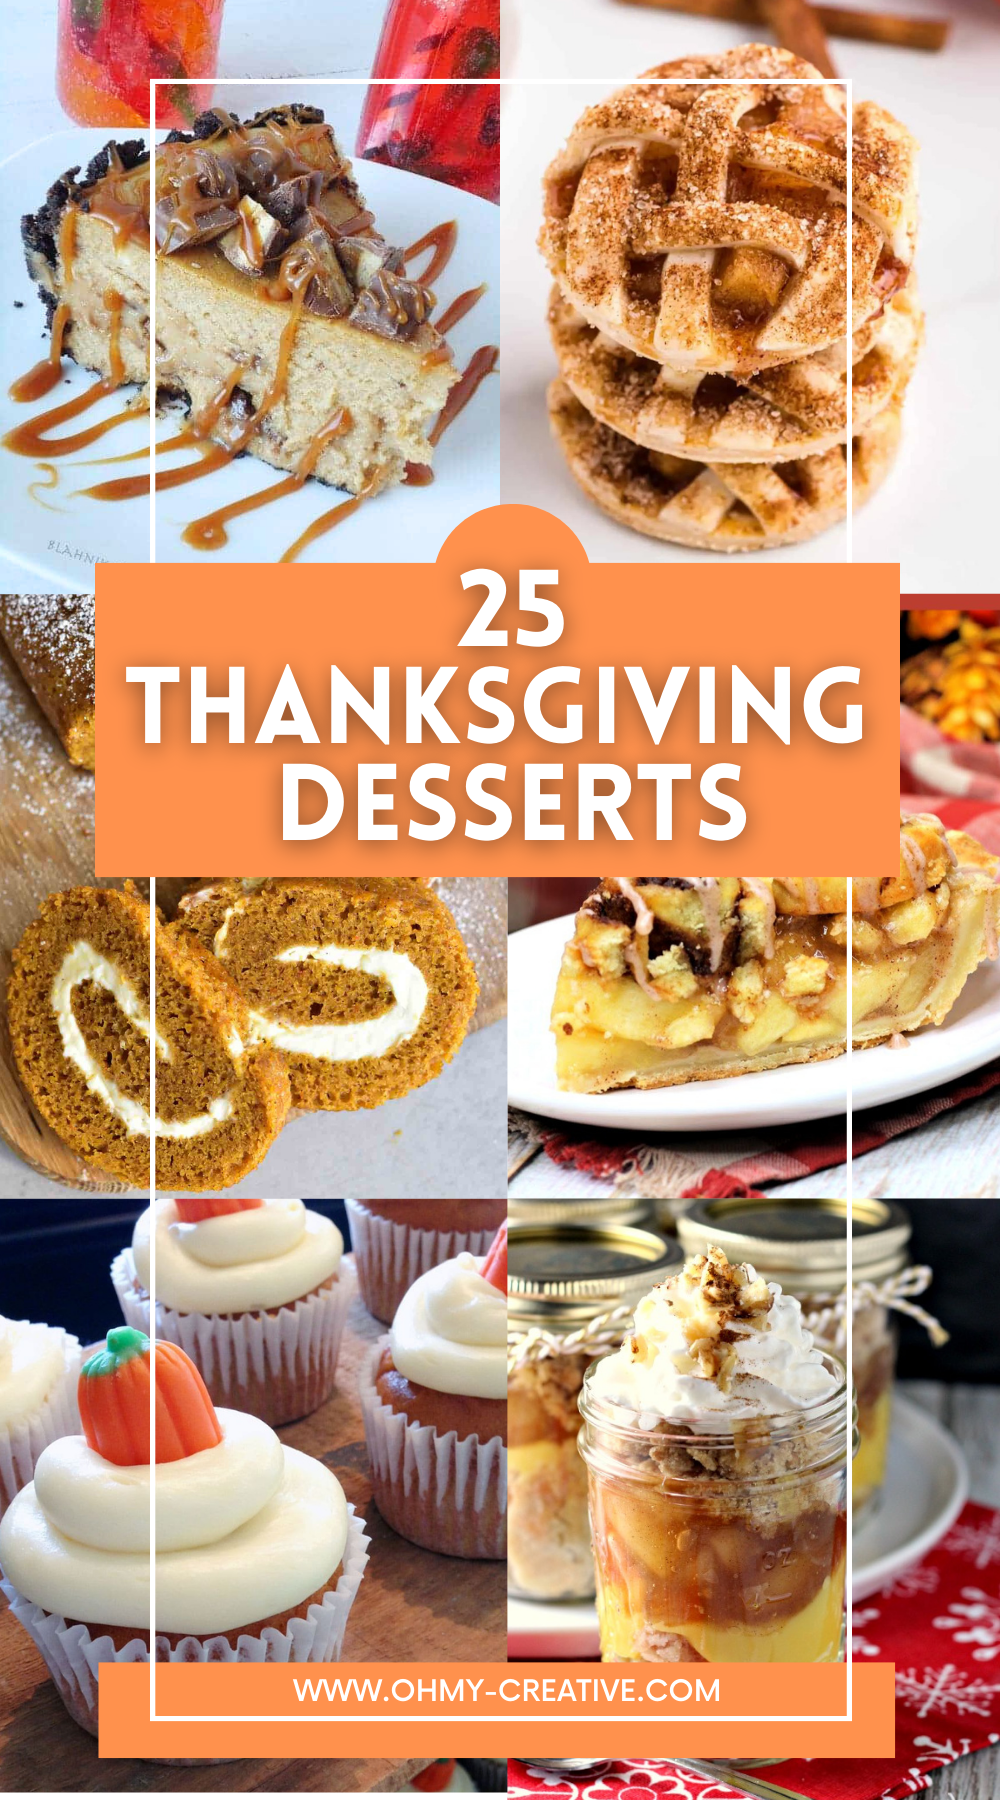 25+ Delicious Thanksgiving Dessert Ideas For The Family